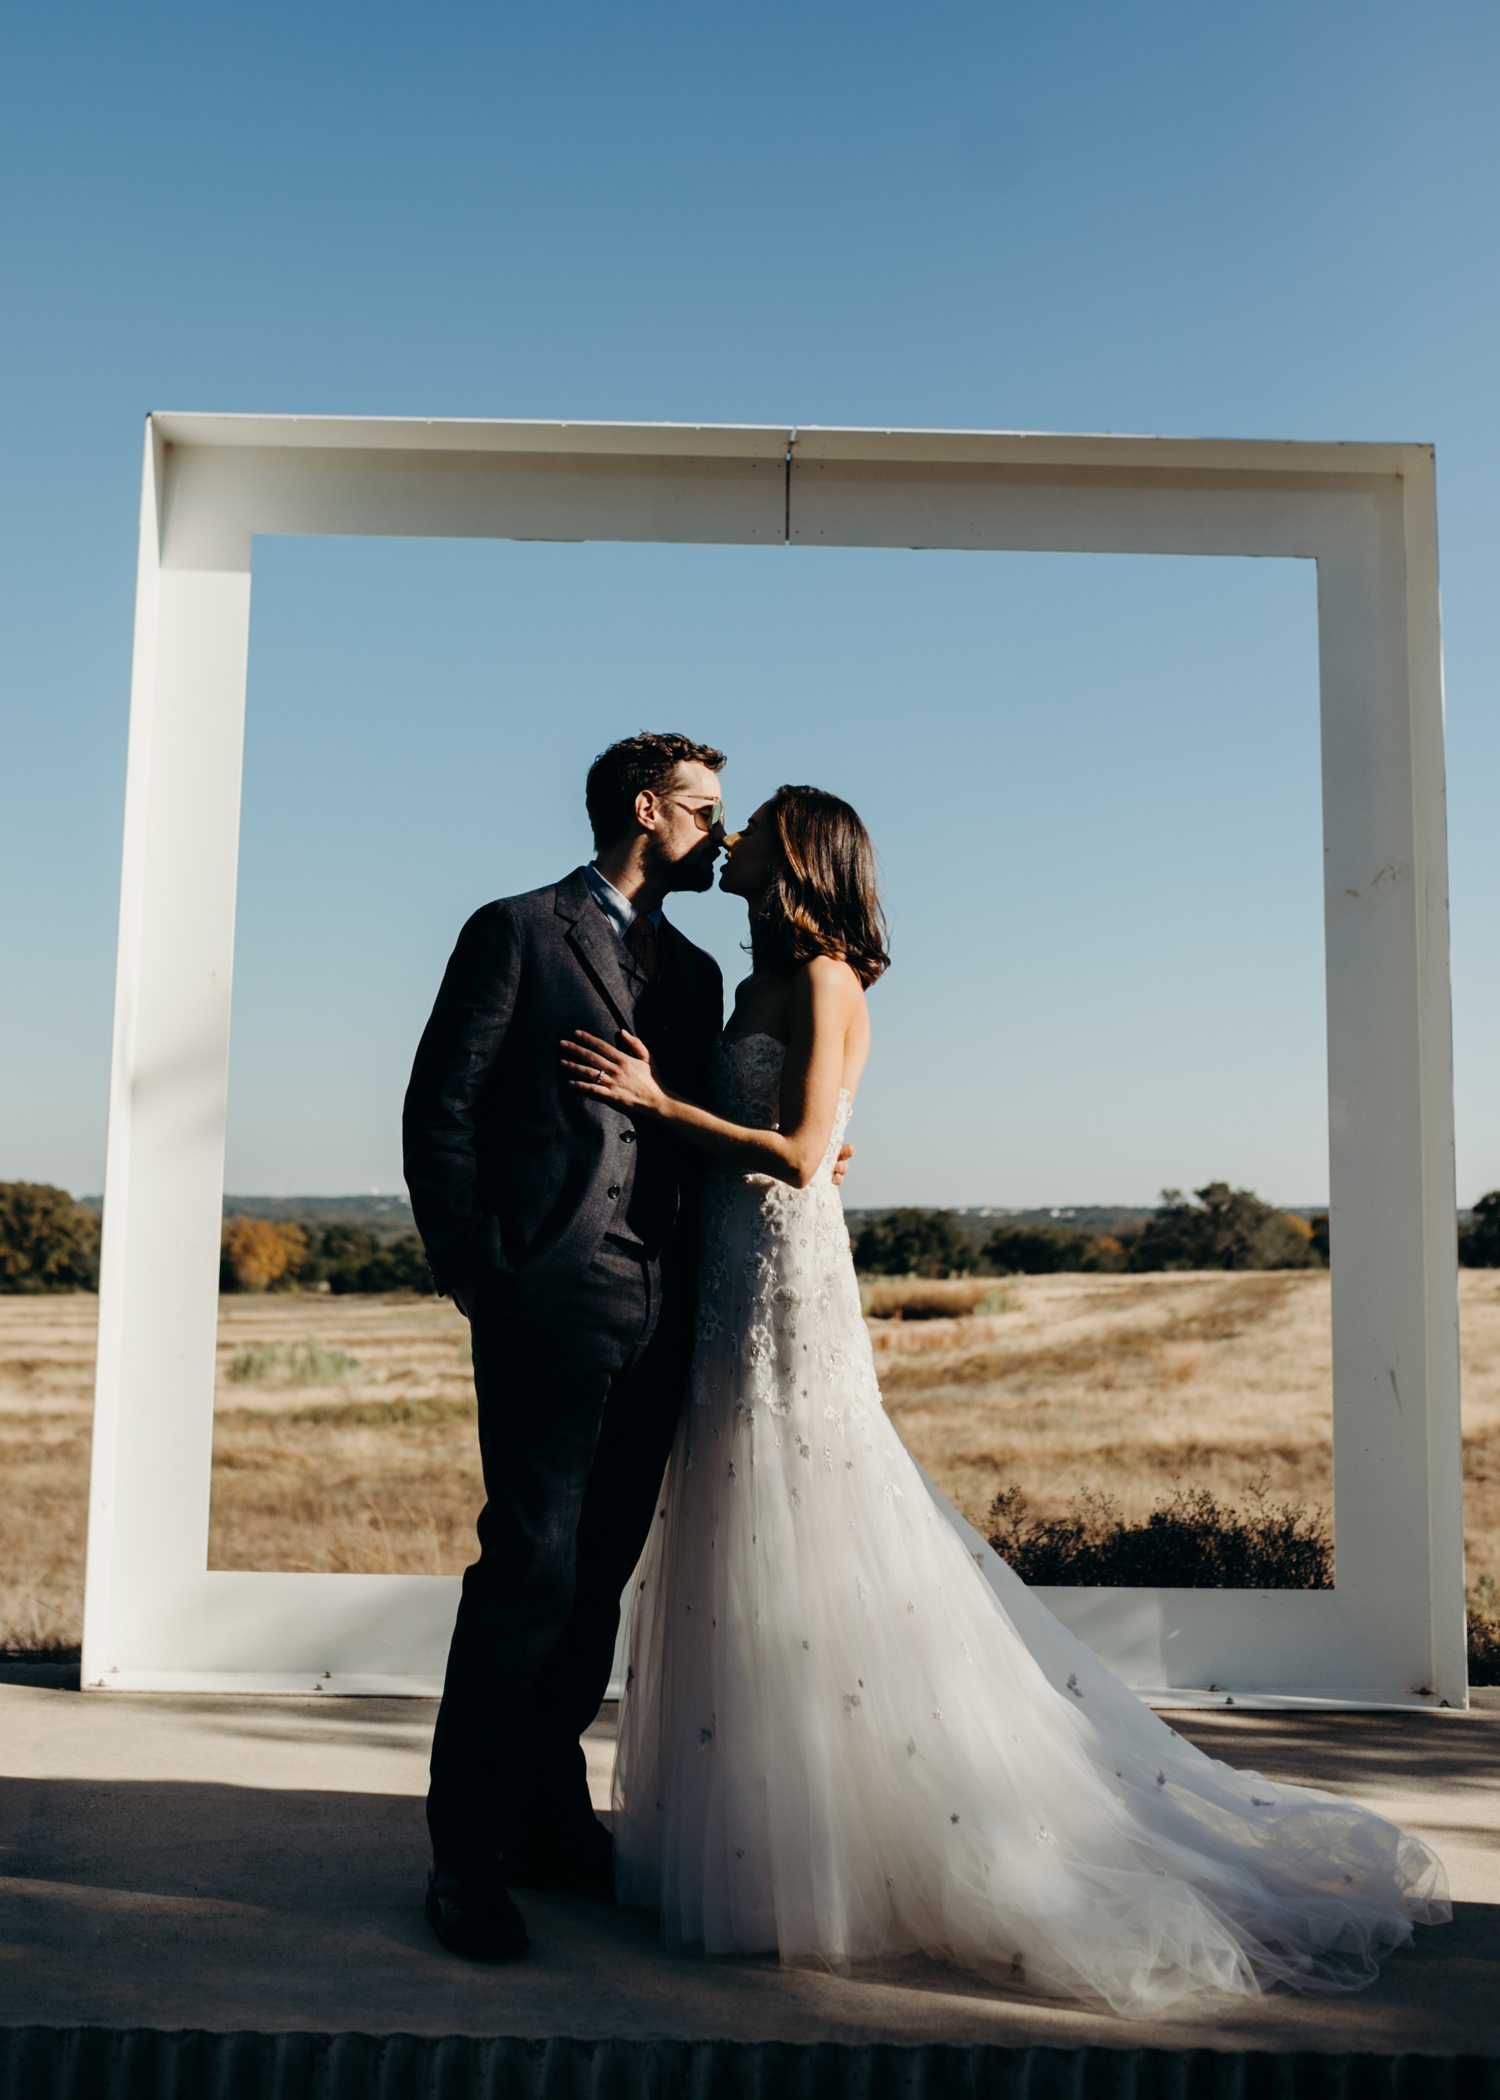 An outdoor ceremony overlooking the Texas Hill Country